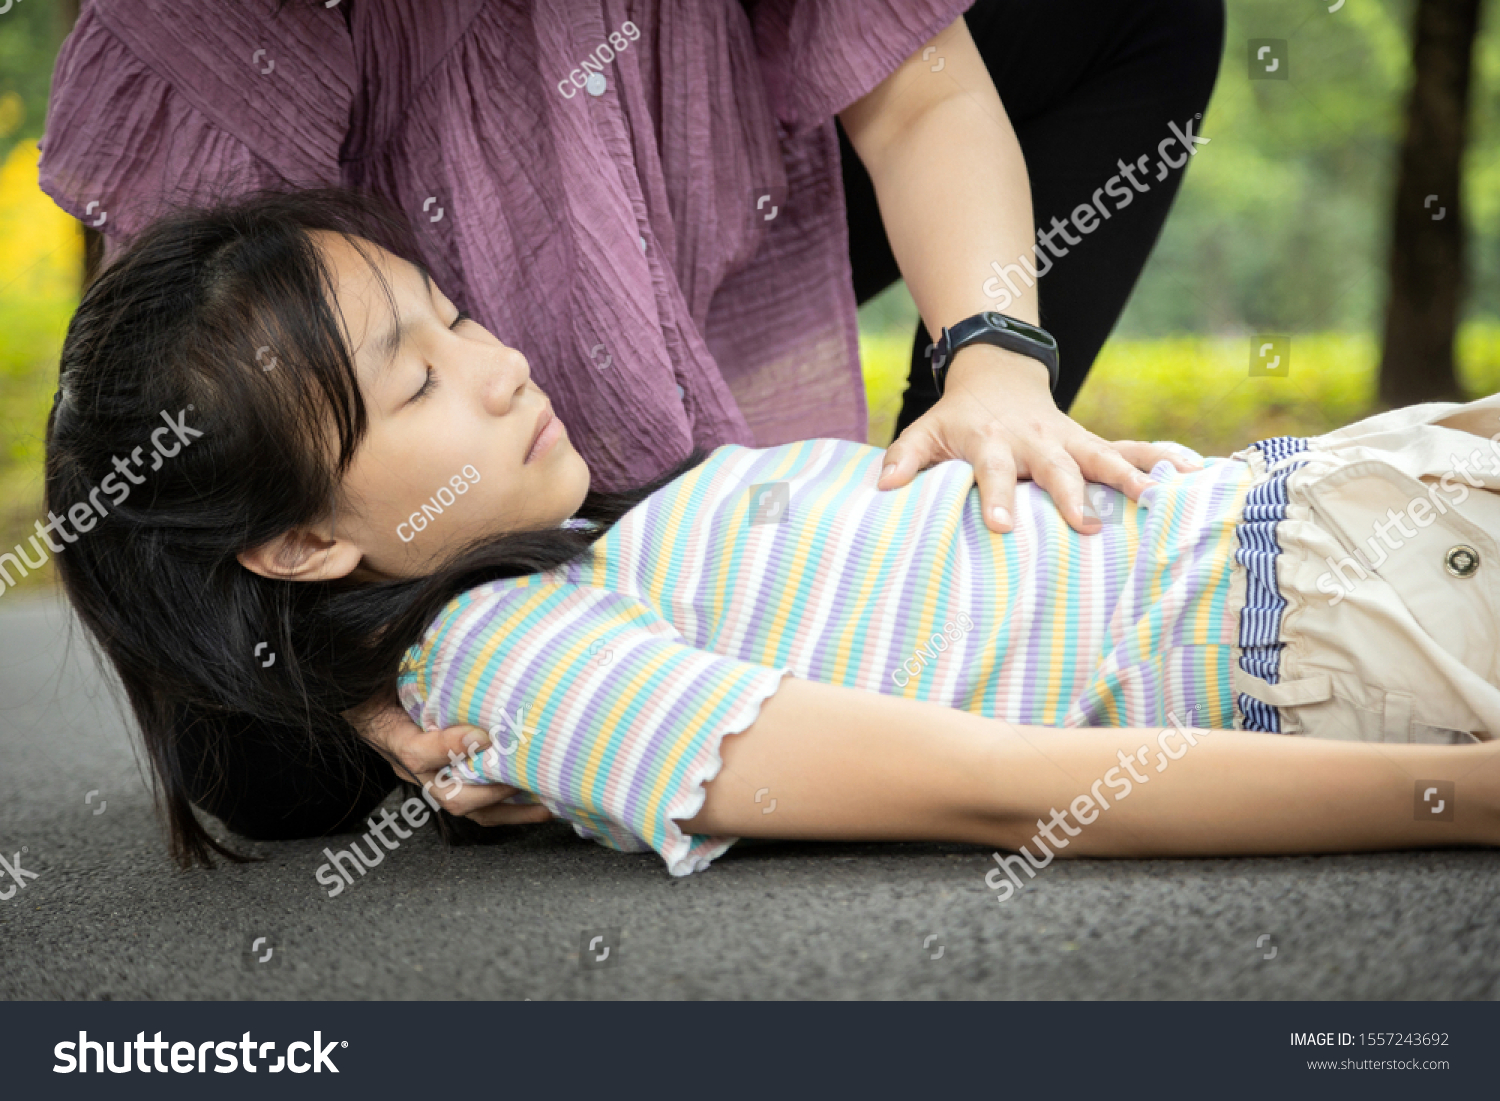 Sick daughter is fainted and fallen on floor while playing and exercise,asian mother help,take care, child girl with congestive heart failure,female unconscious fell to the ground suffer heart attack #1557243692